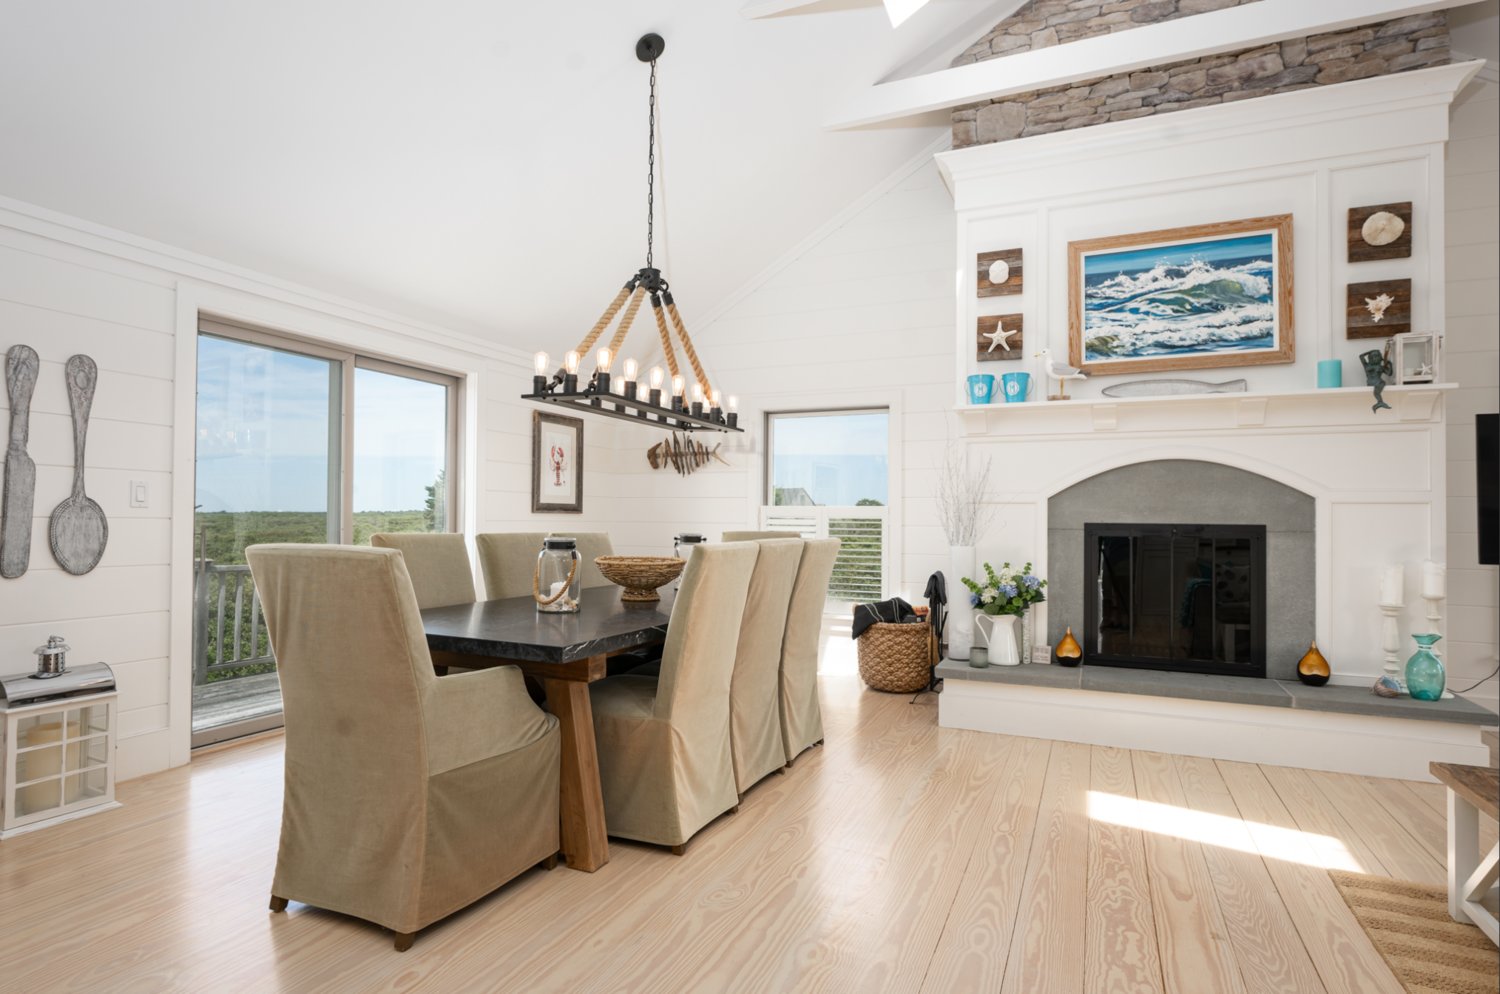 The open-concept second-floor combines the living and dining areas beneath cathedral ceilings, and has access to the deck with distant water views.